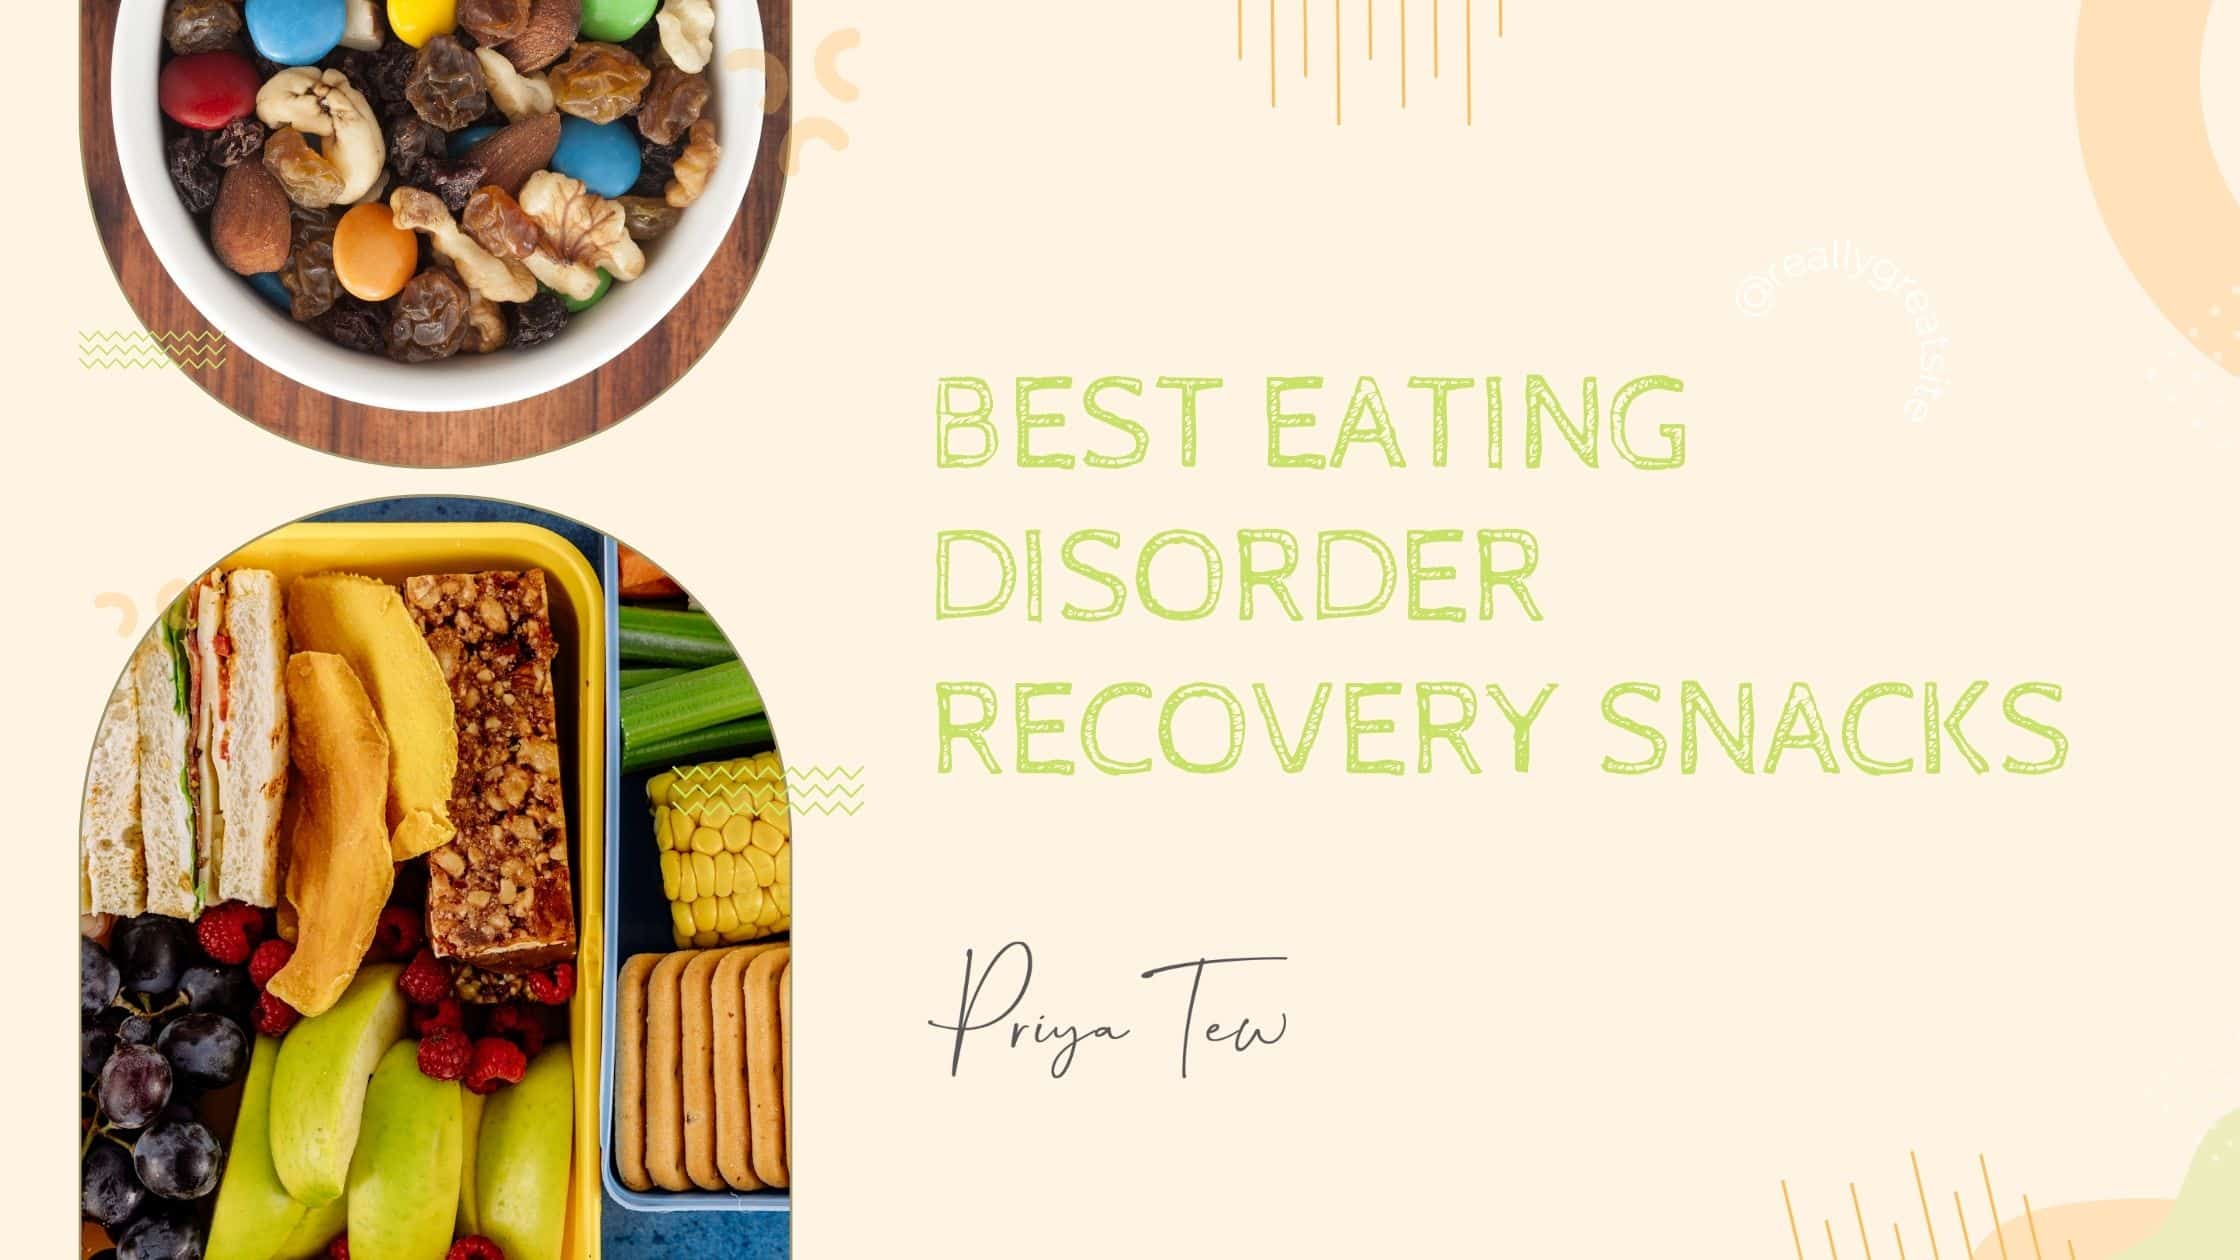 Best Eating disorder recovery snacks with examples on the image